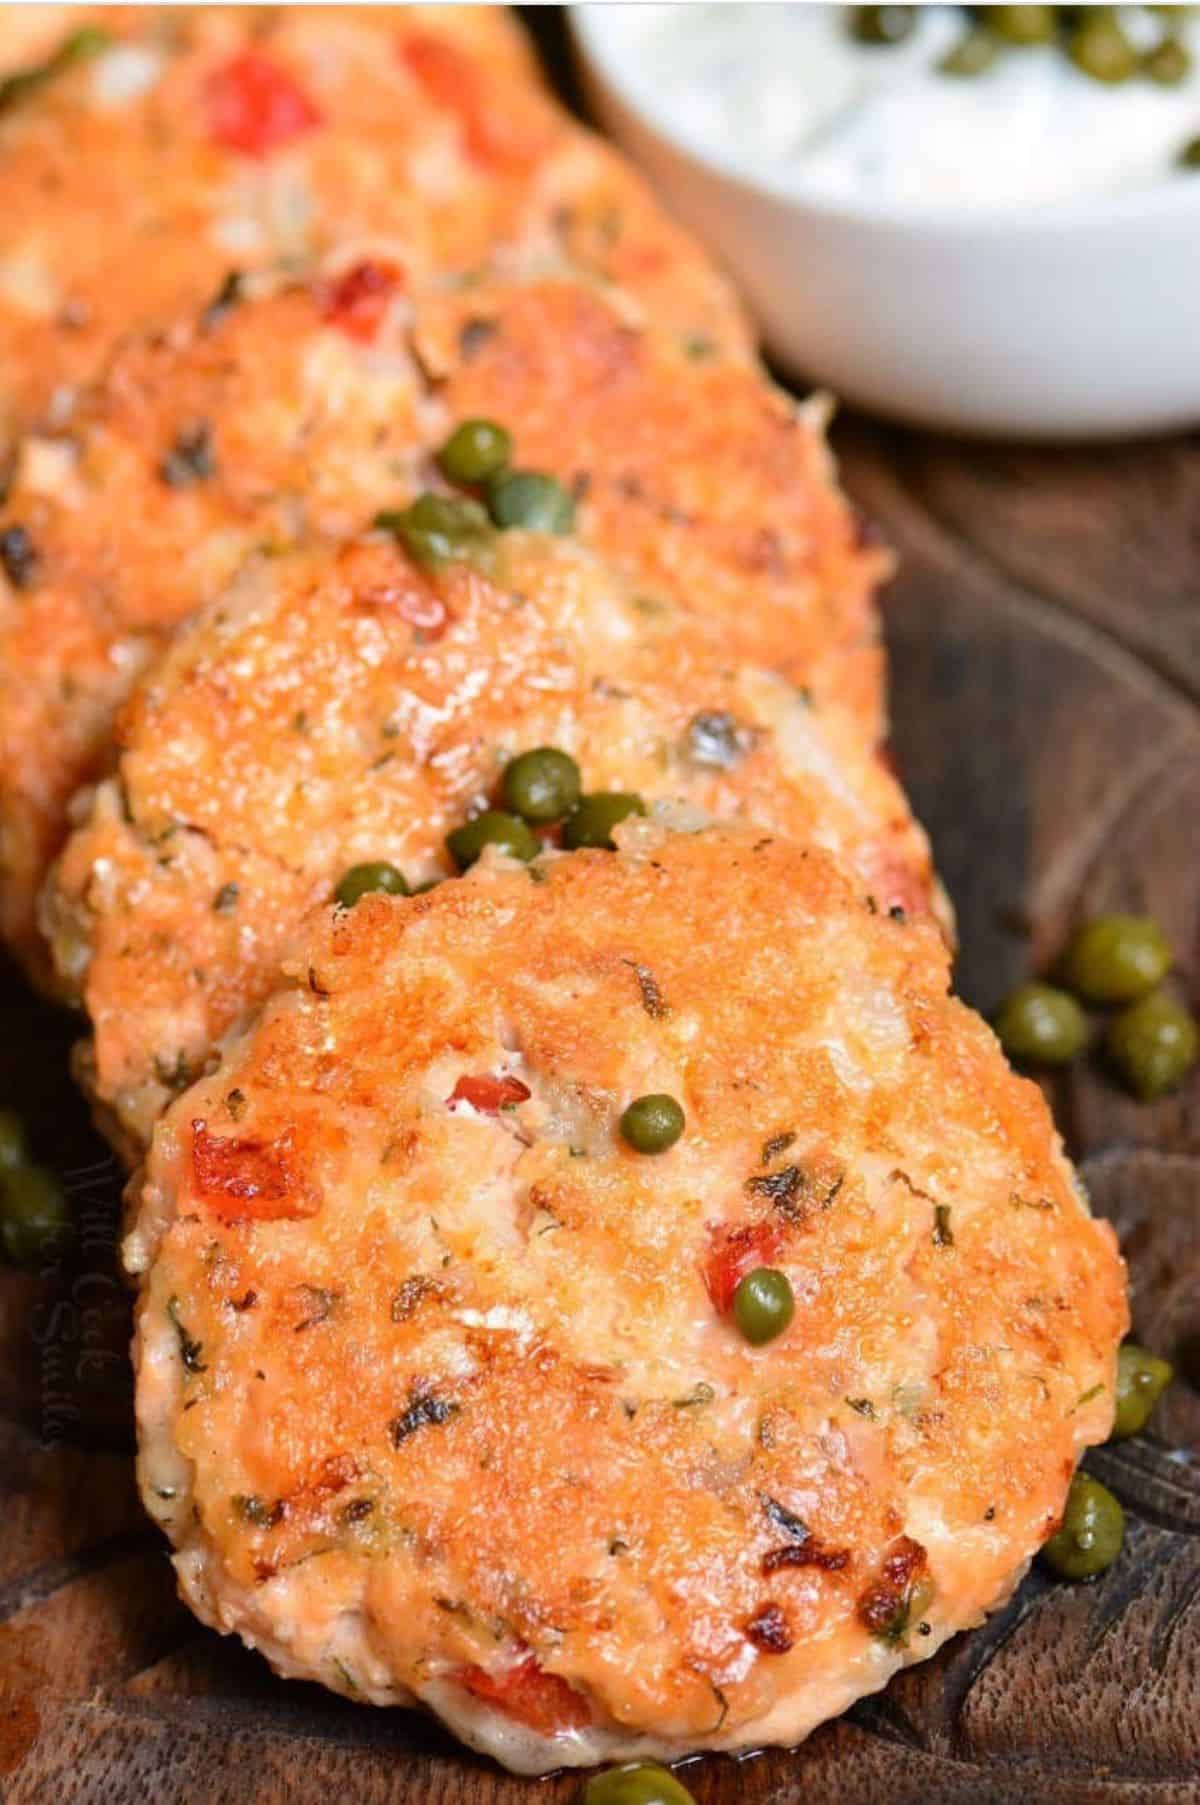 several salmon patties side by side on wooden plate with capers.